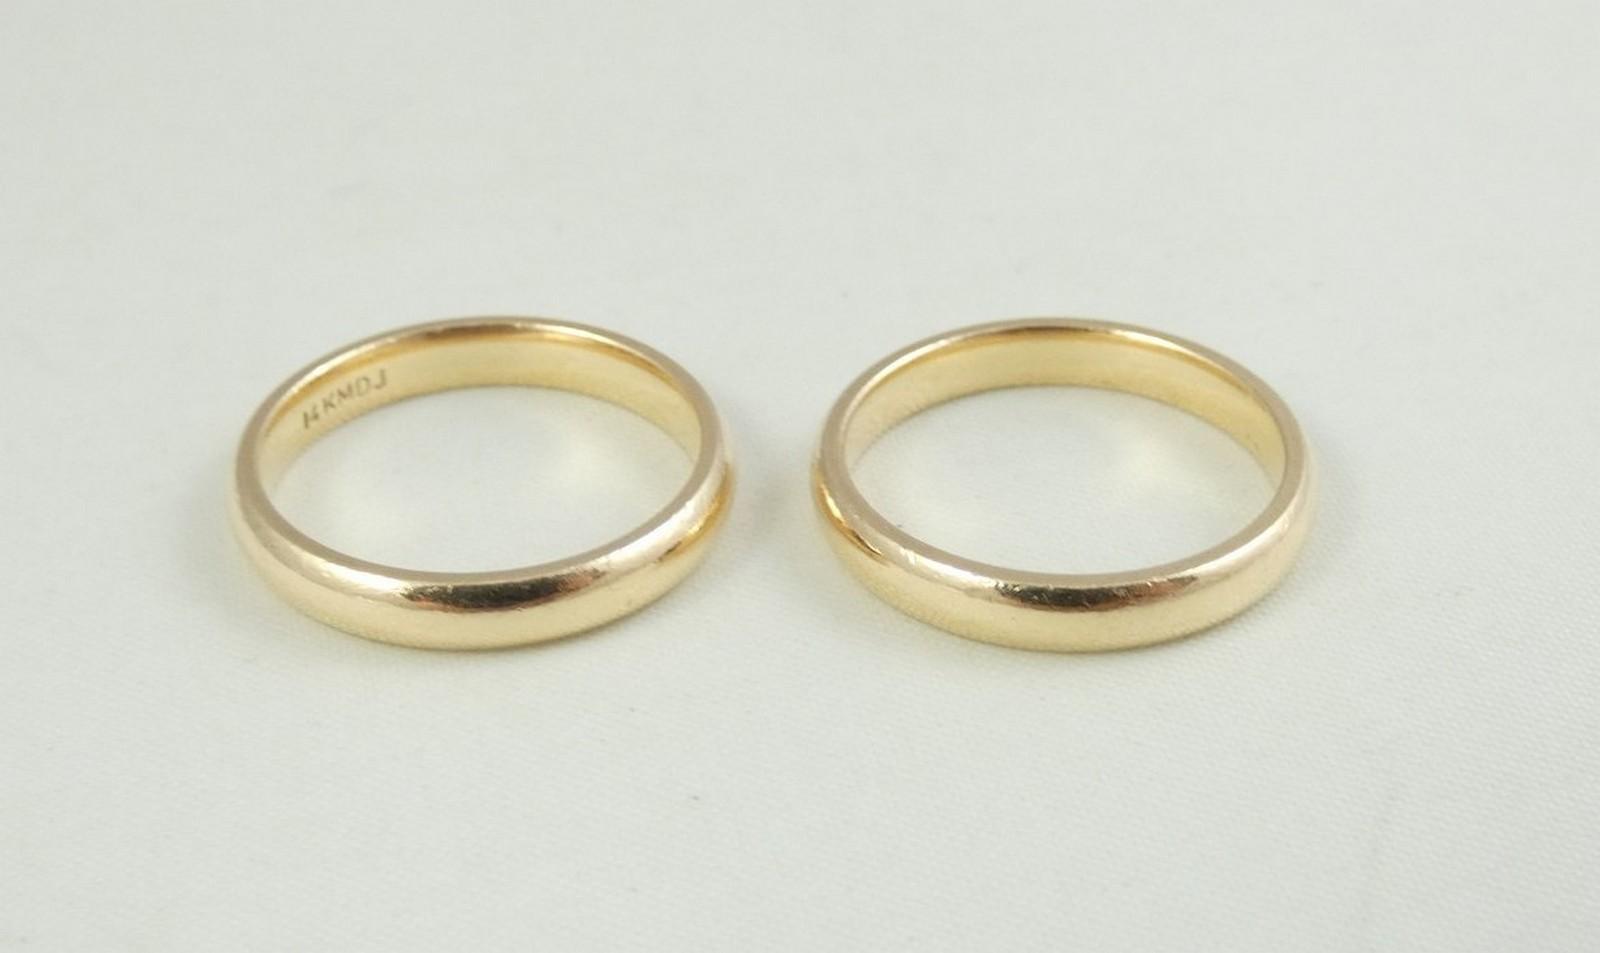 PAIR GOLD BANDS